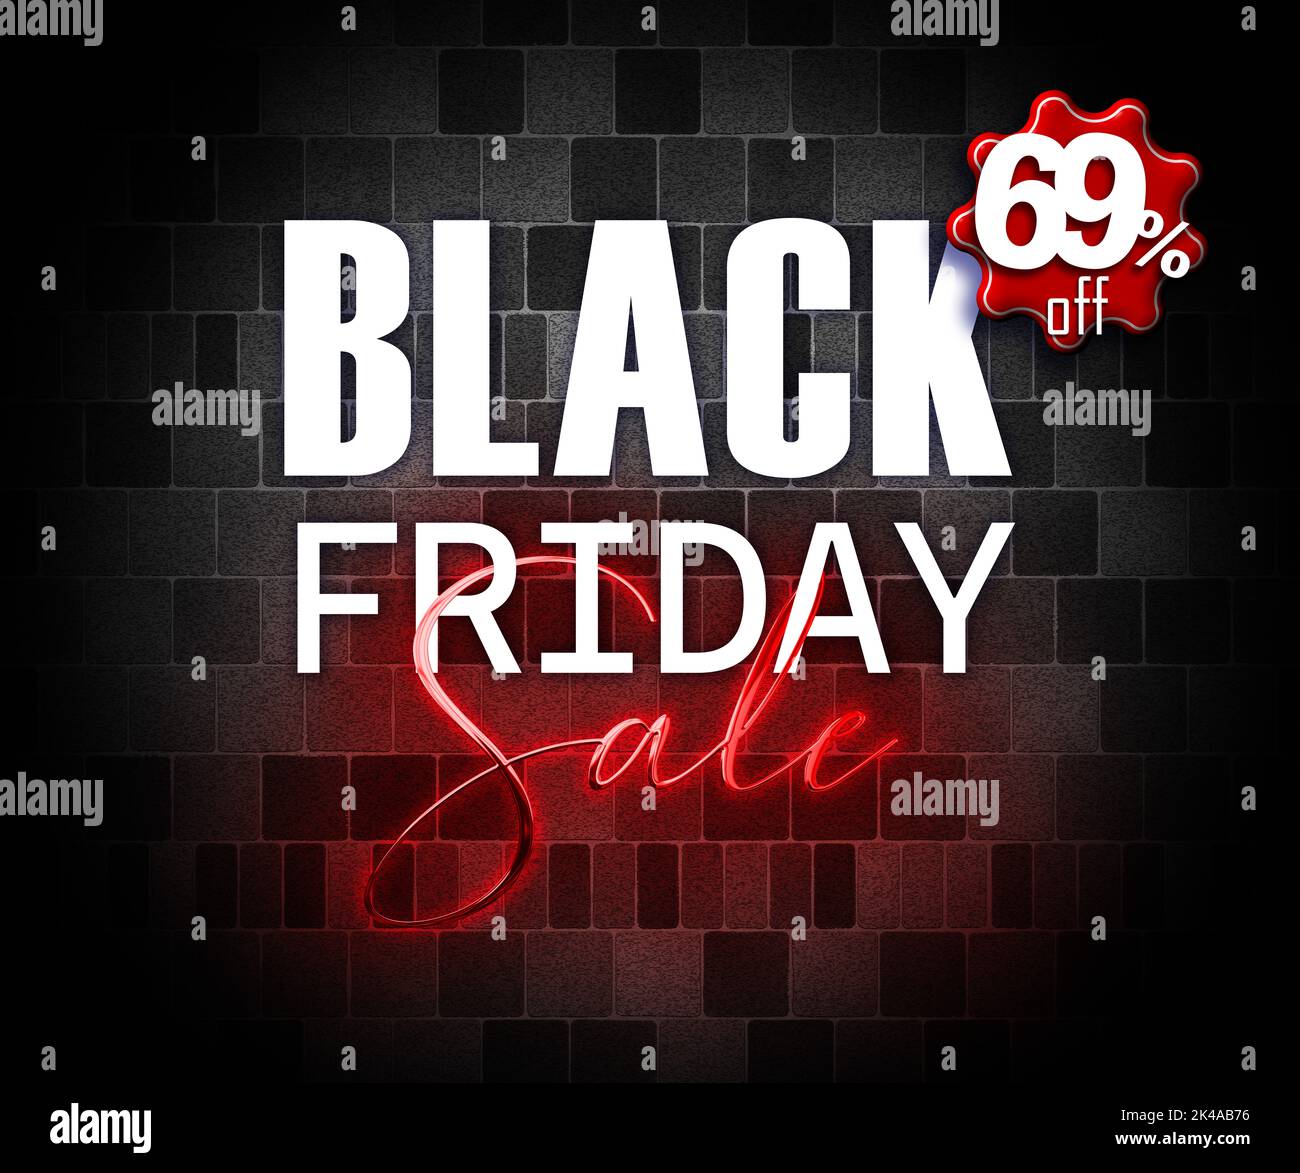 illustration with 3d elements black friday promotion banner 69 percent off sales increase Stock Photo